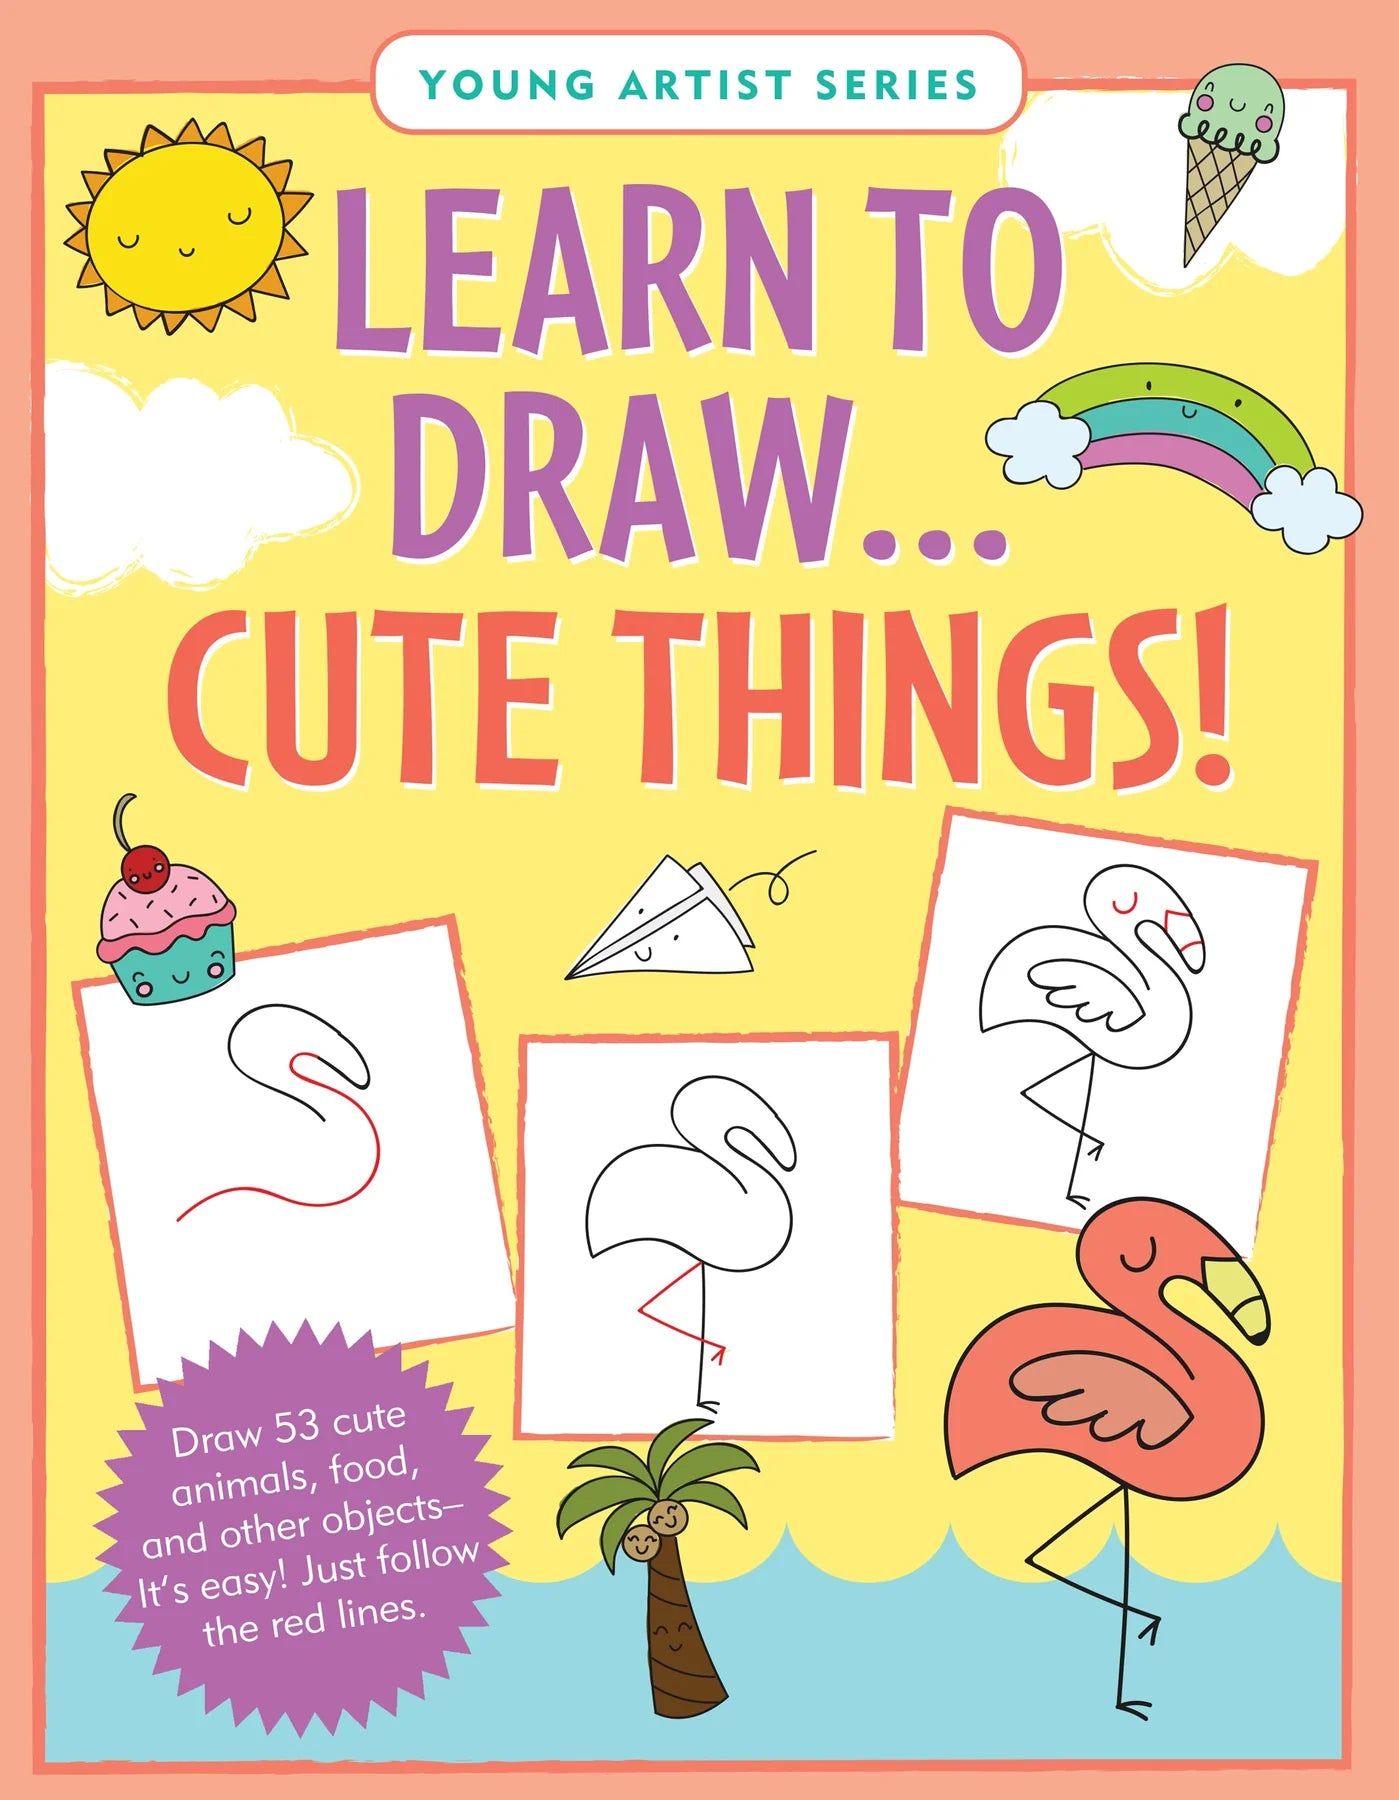 How to Draw Cute Stuff 